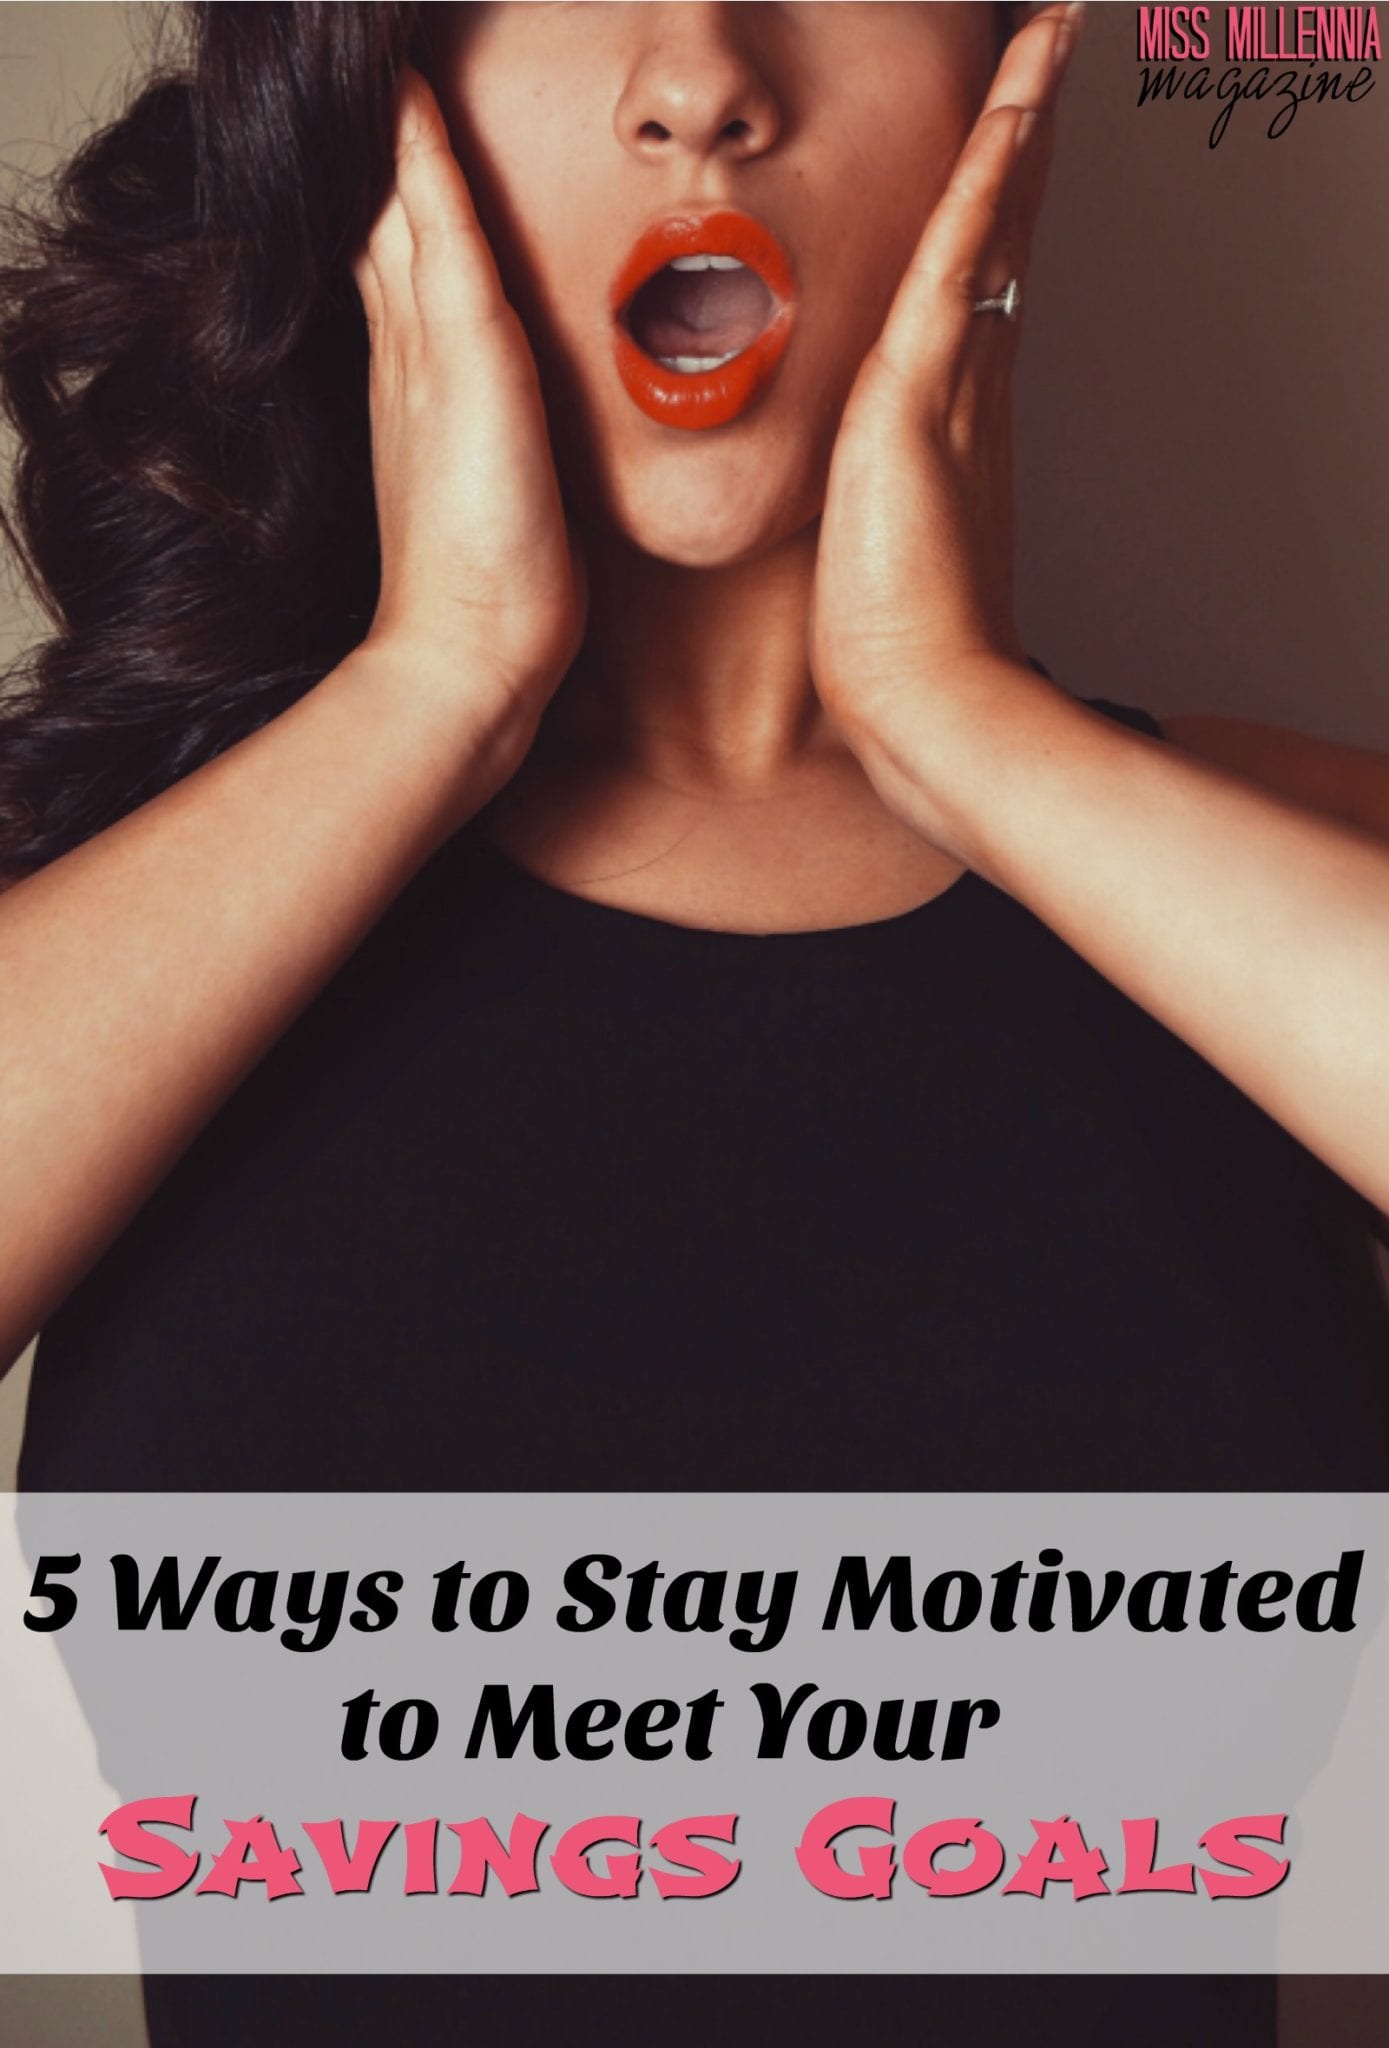 5-ways-to-stay-motivated-to-meet-your-savings-goals